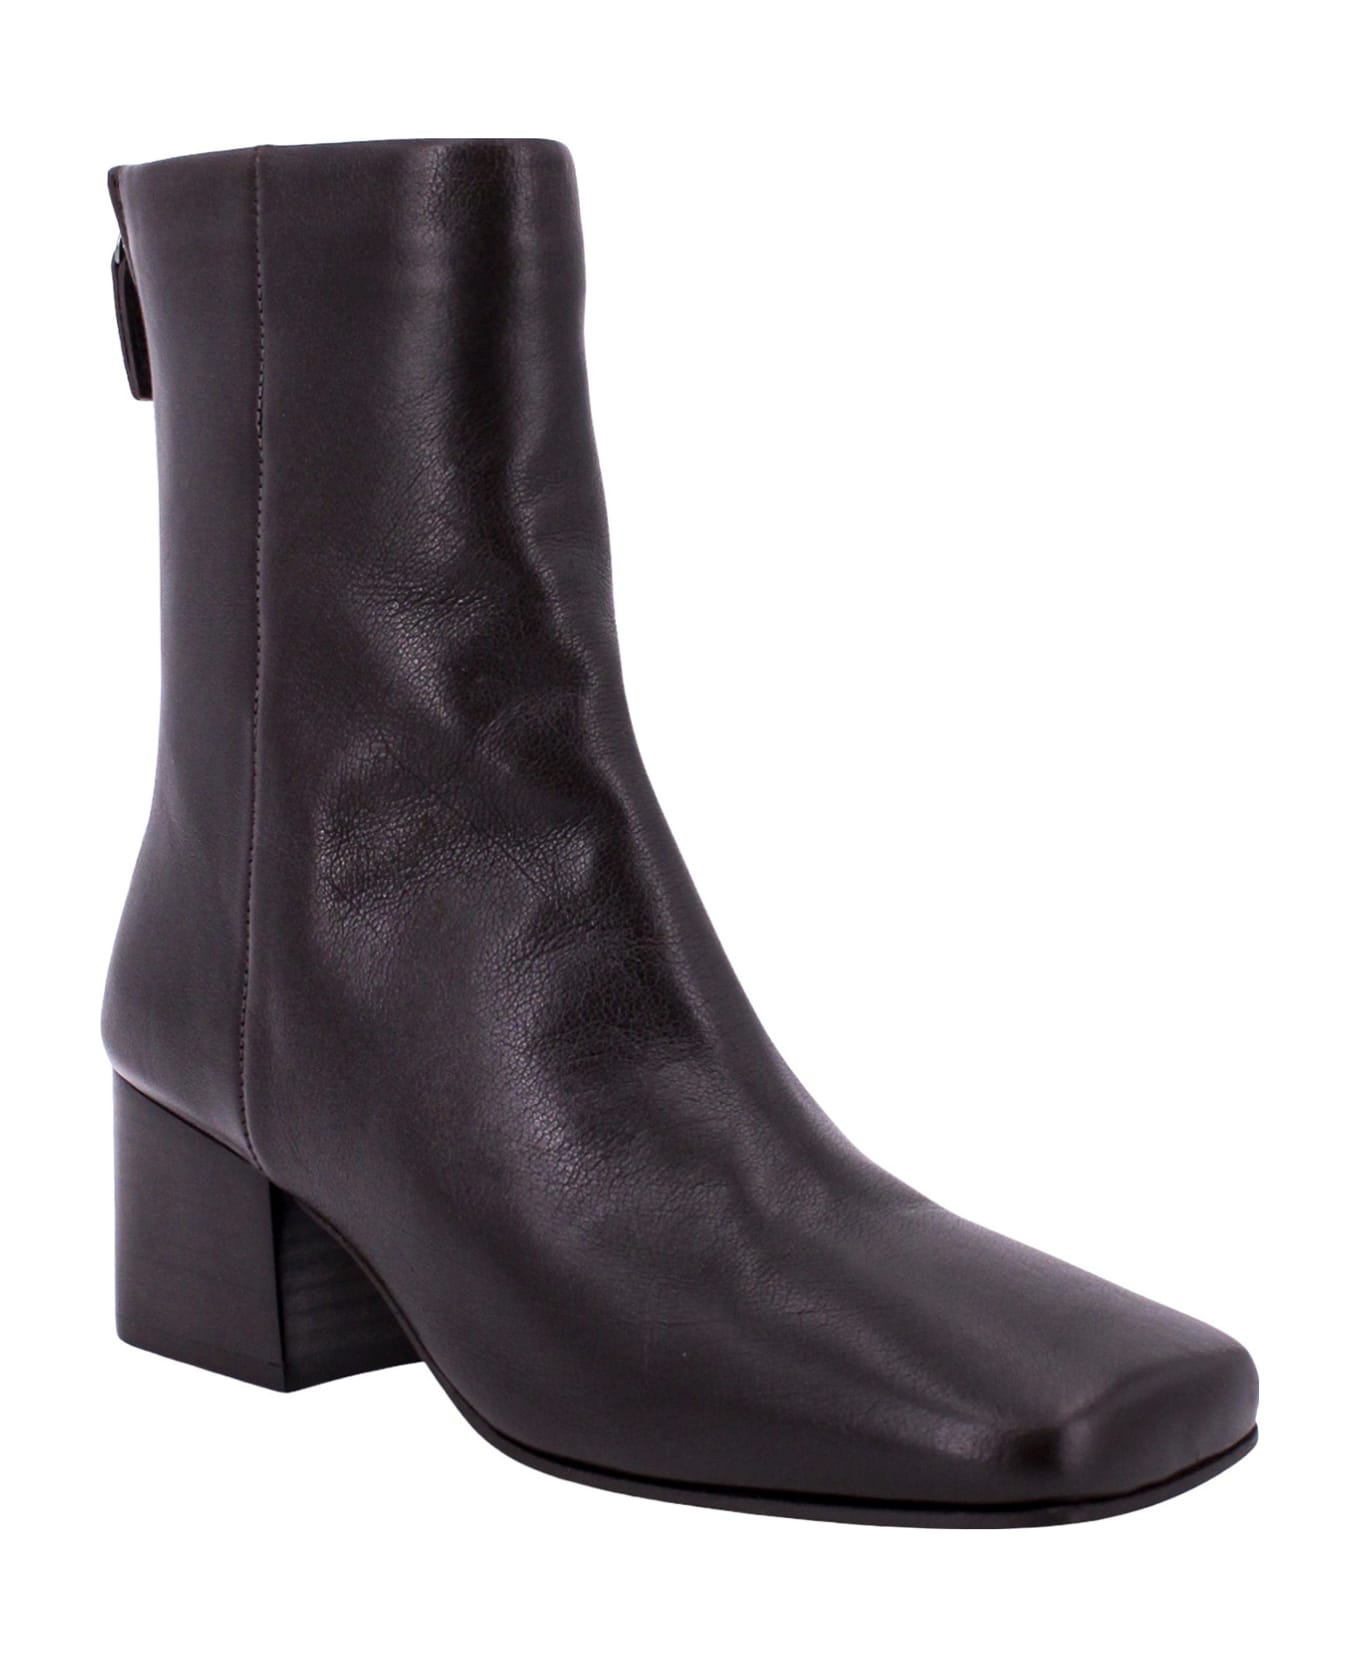 Lemaire Ankle Boots - Dark Chocolate